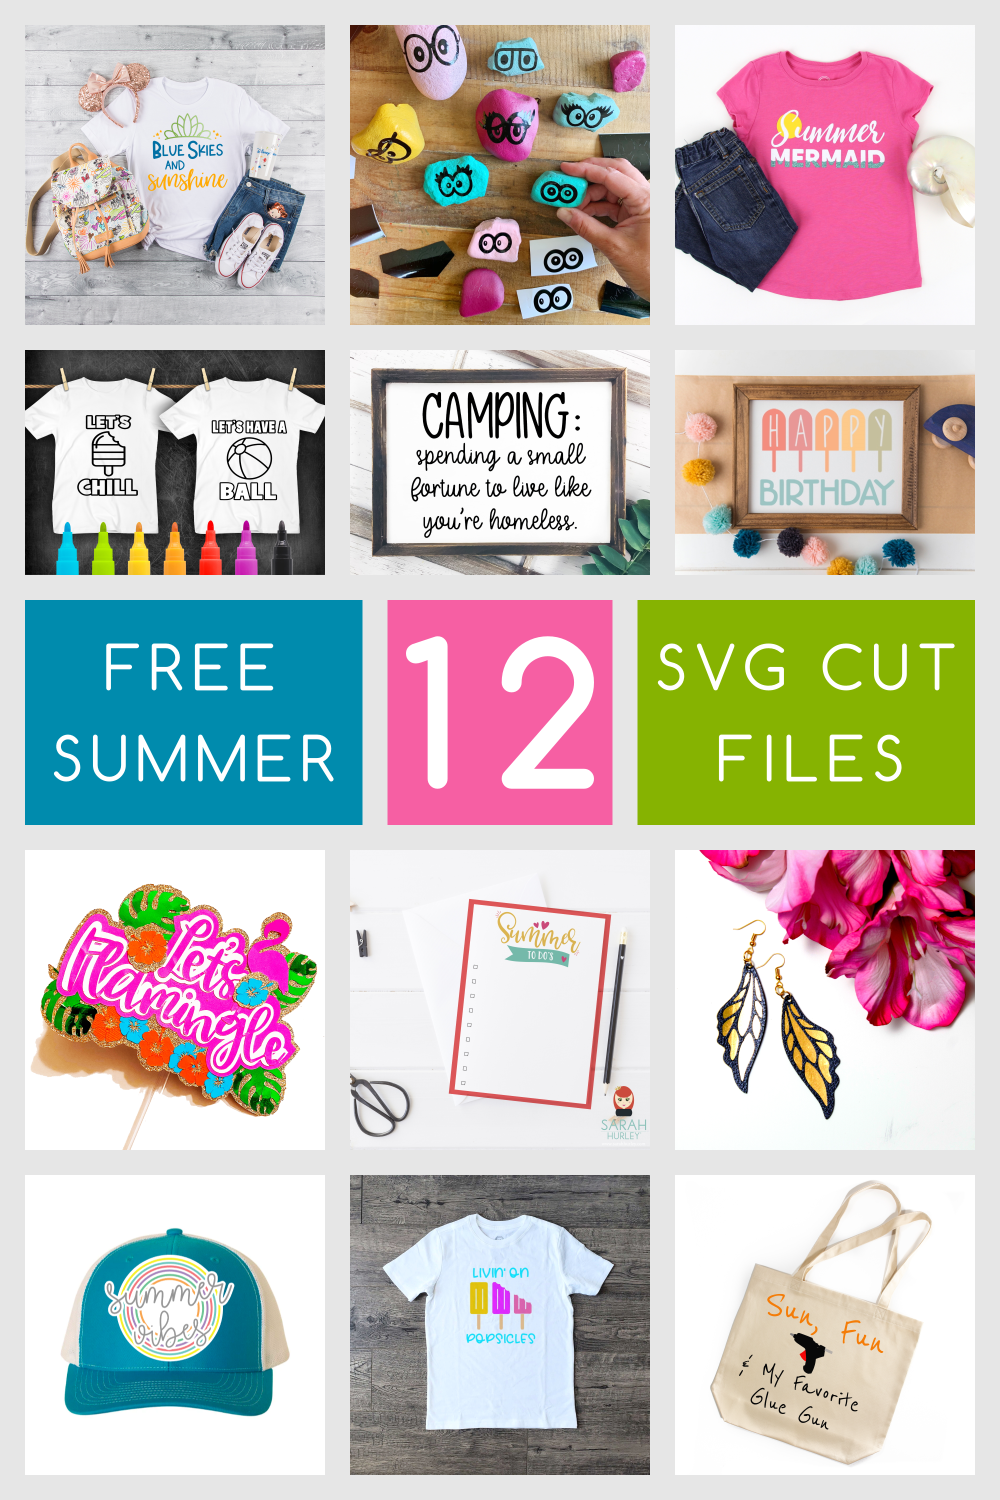 Get 12 FREE Summer SVG Cut Files and see a step-by-step tutorial for how to apply it to a t-shirt. Click here to find the file and more from Polka Dotted Blue Jay.